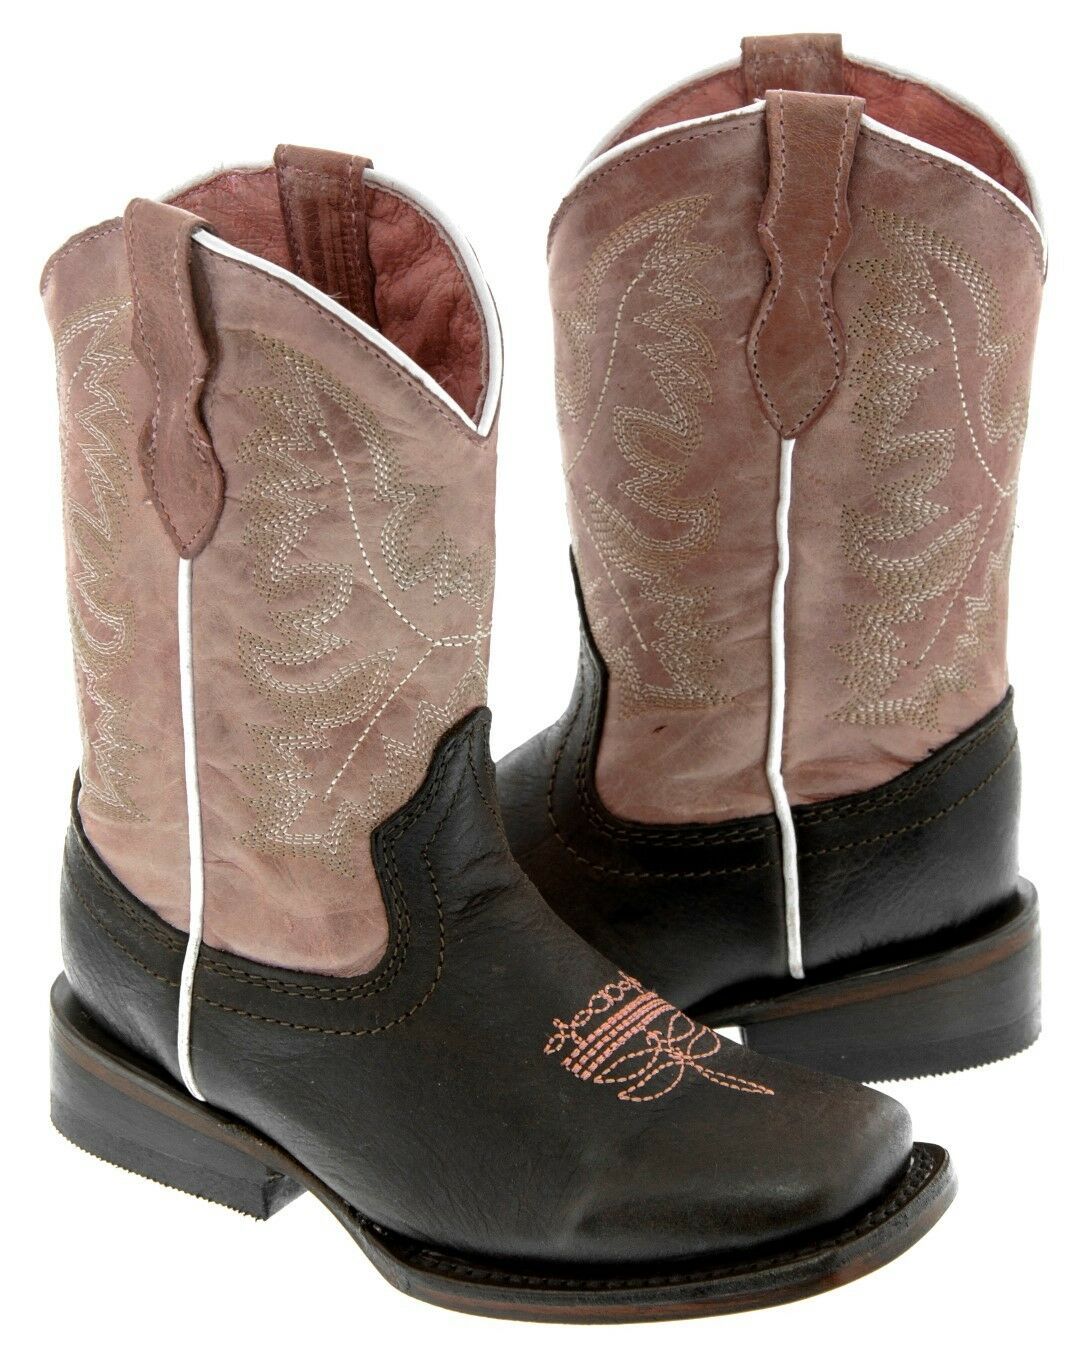 Primary image for Kids Girls Pink Dark Brown Plain Leather Western Cowgirl Boots Rodeo Square Toe